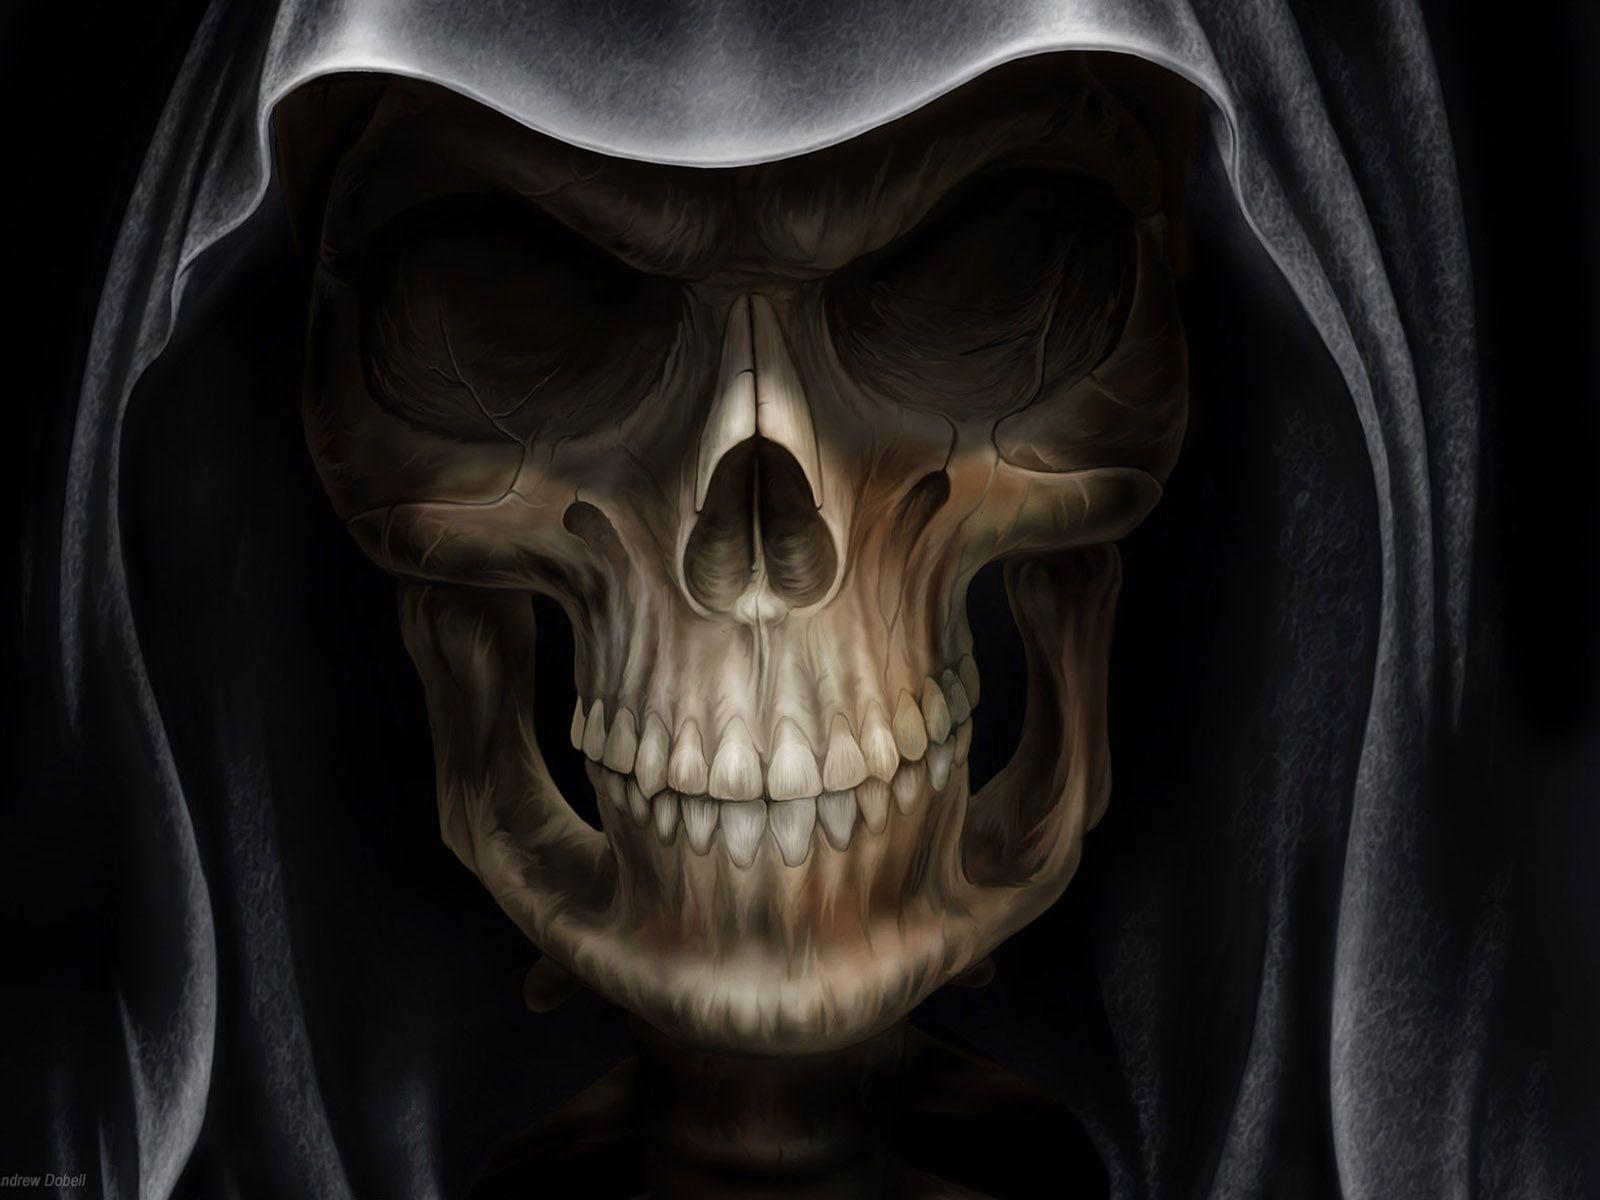 Cool Skeleton Wallpapers 45 images